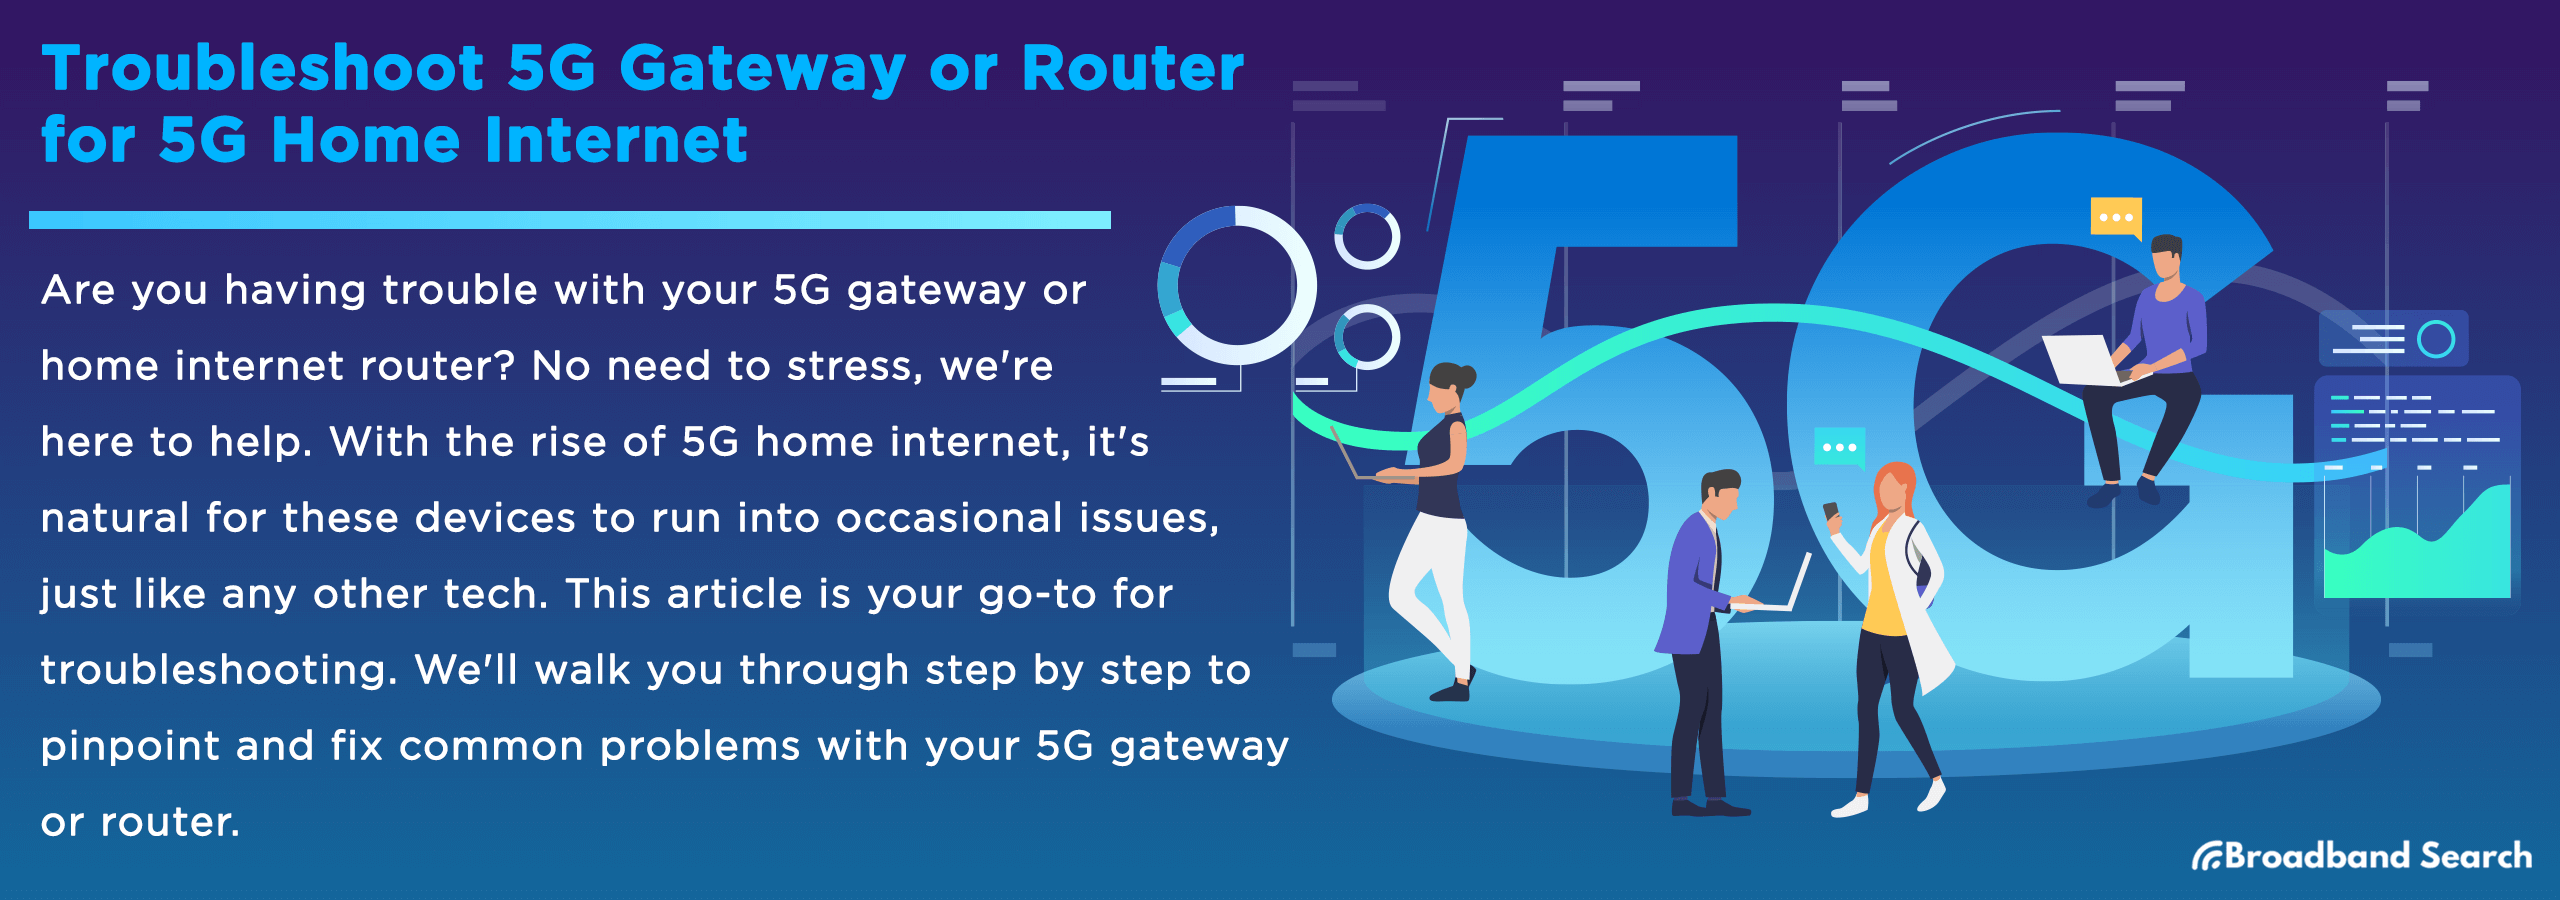 5G Home Internet Gateway and Router Troubleshooting Guide